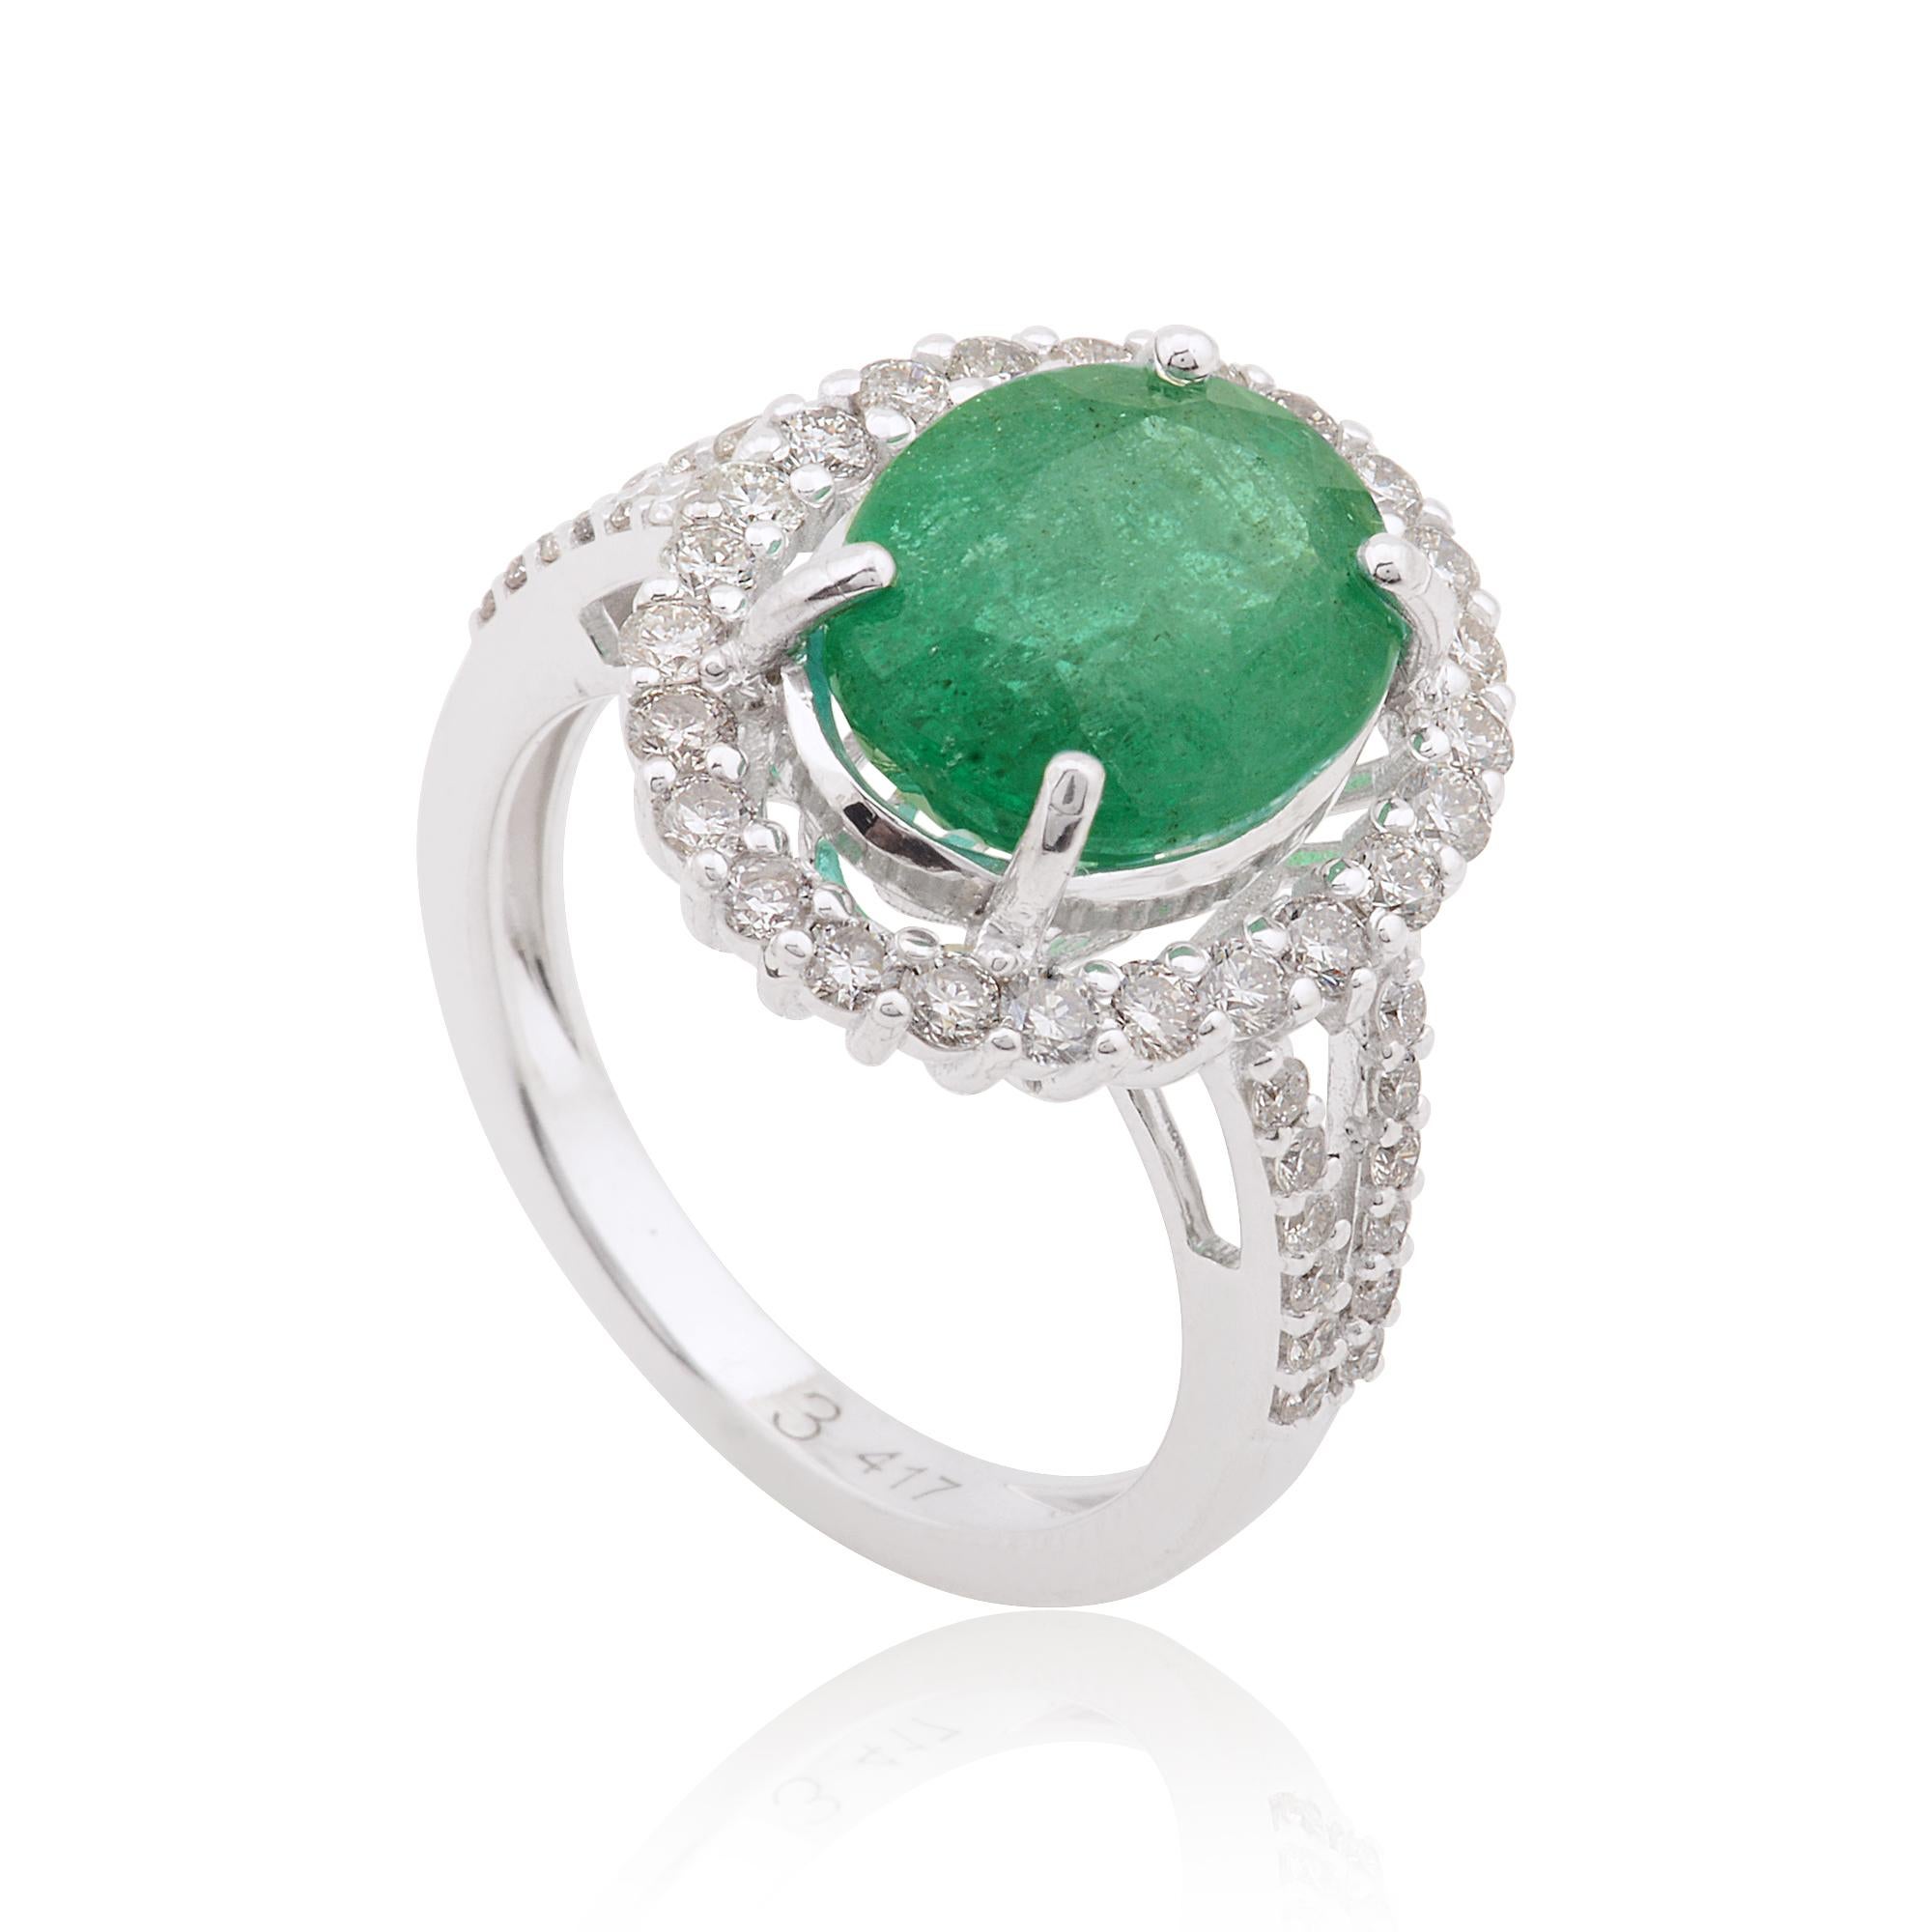 A cocktail ring featuring an oval-shaped emerald gemstone and diamonds in 10 karat white gold is a glamorous and striking piece of fine jewelry. The ring typically showcases a large oval-shaped emerald as the central feature, accented by